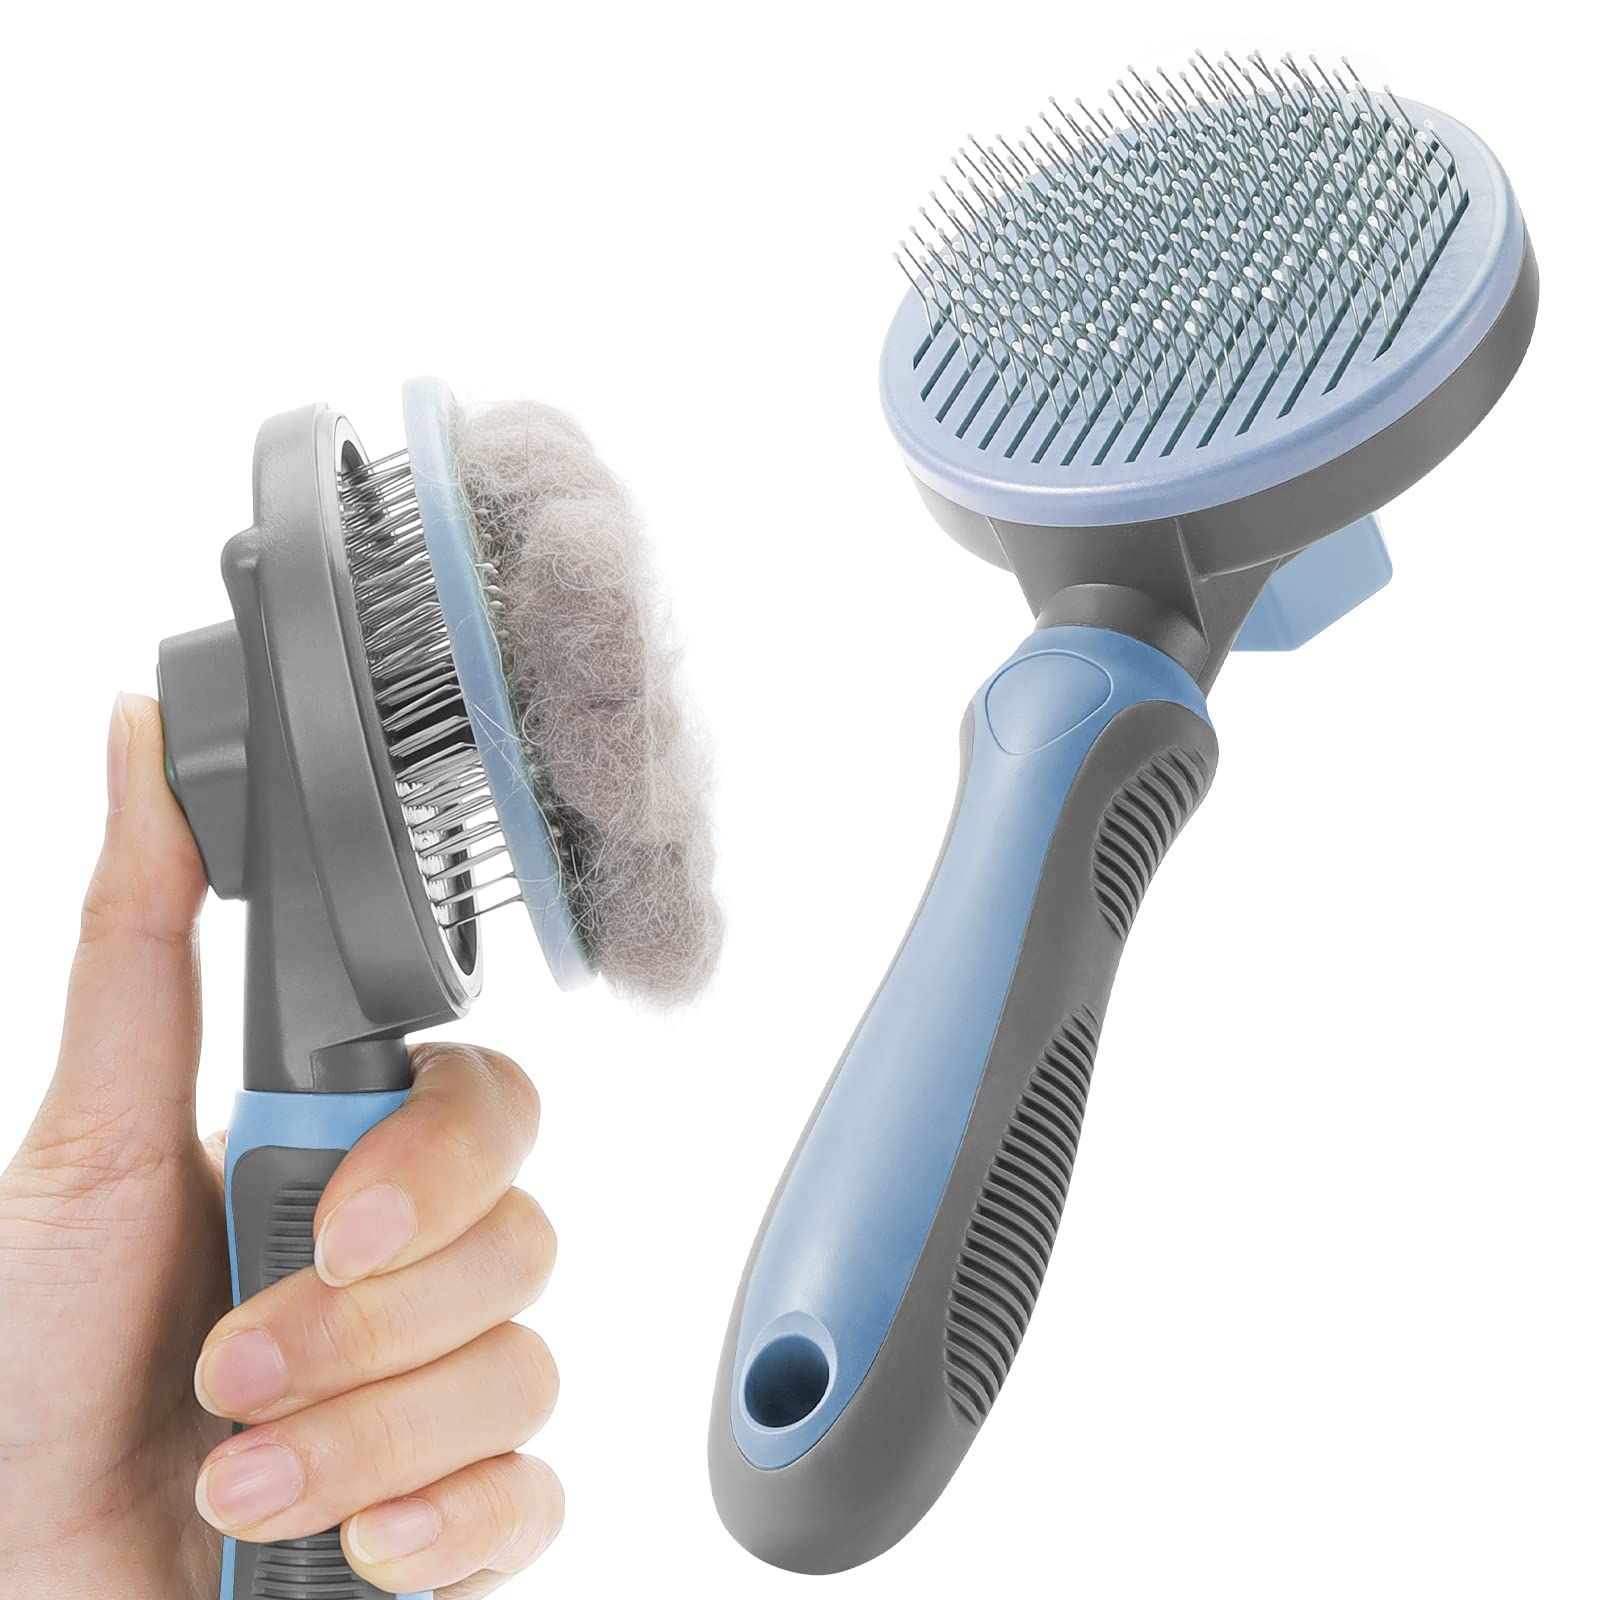 HaiRify TM : Lint and Pet Hair Remover Brush – frenchie Shop